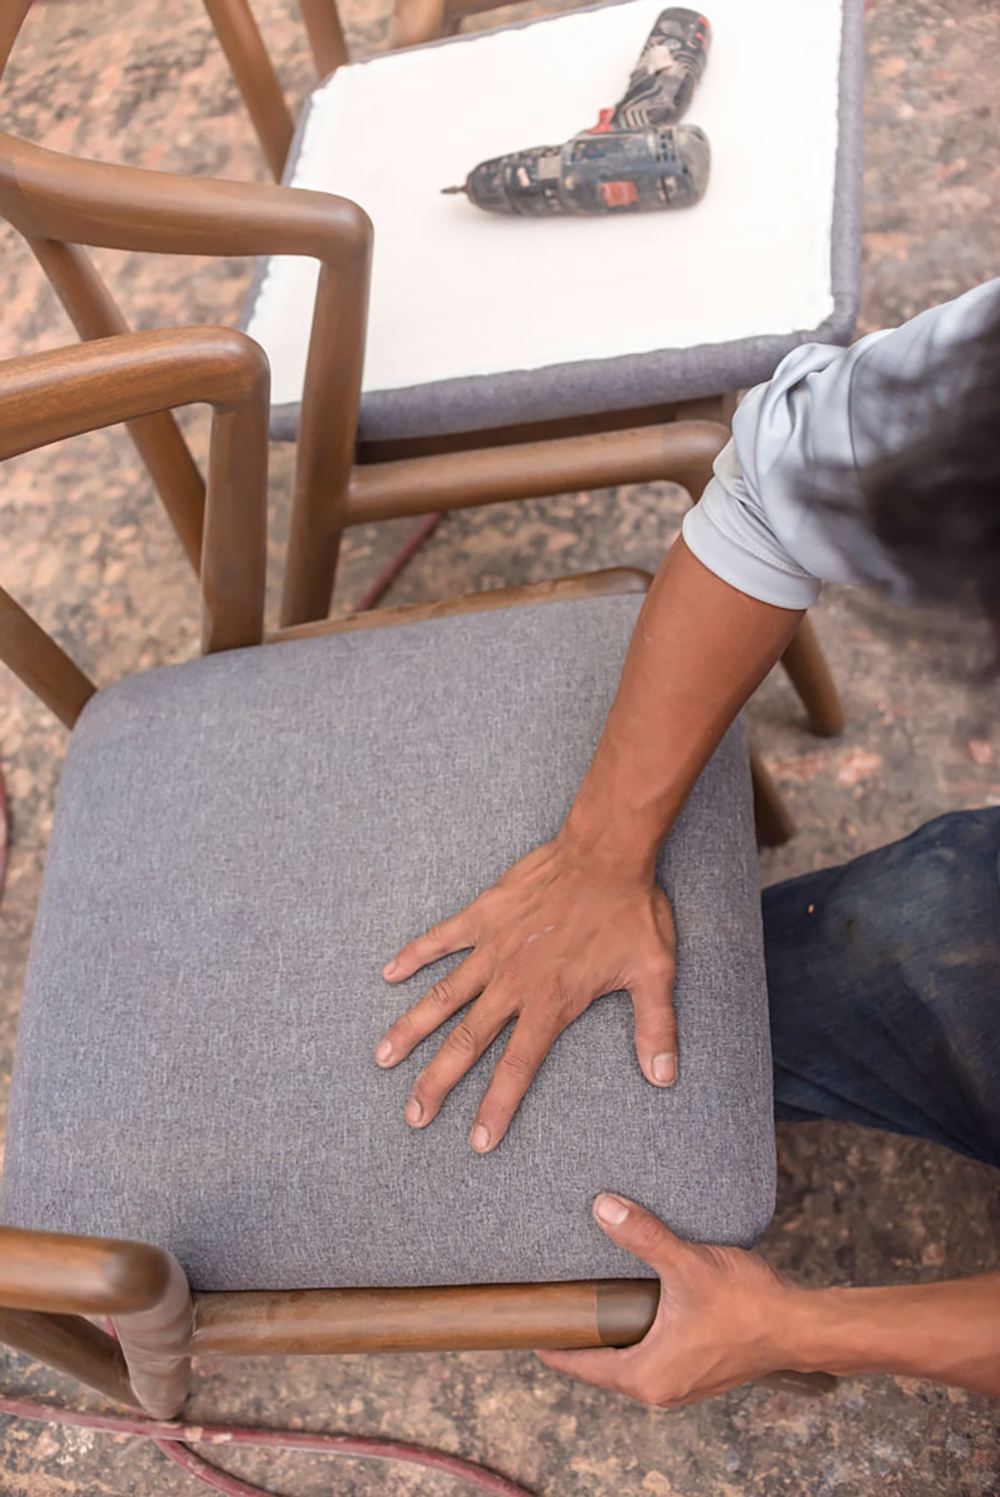 An upholsterer fits a cushioned pad into a wooden chair